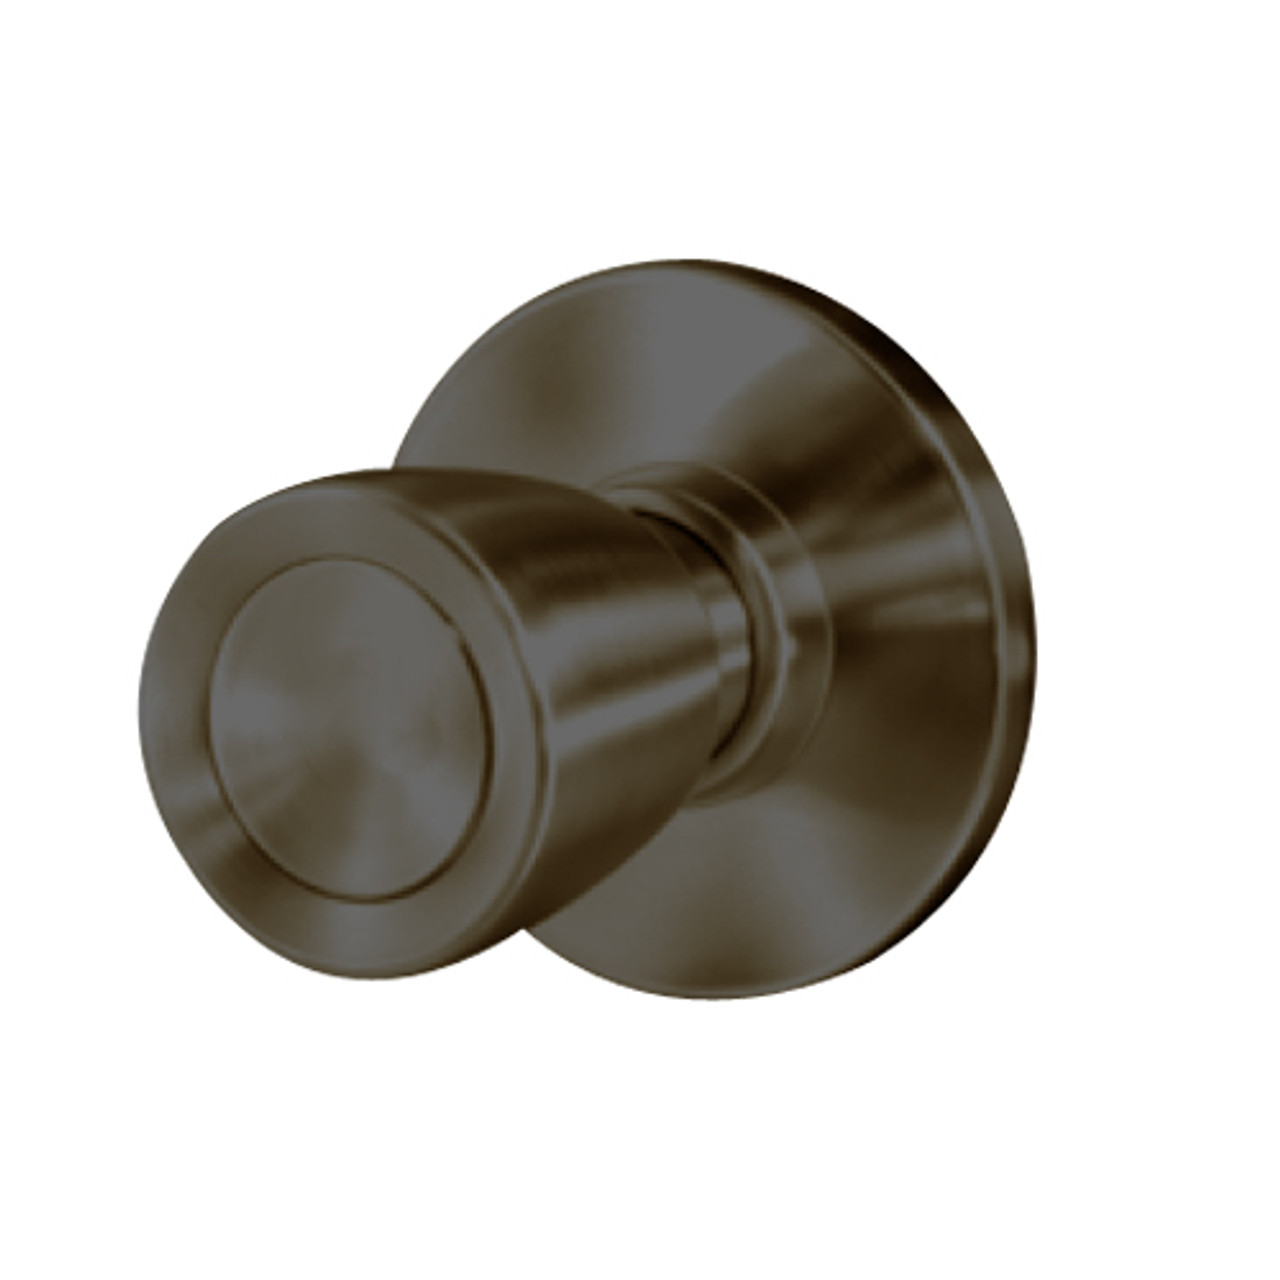 8K30NX6ASTK613 Best 8K Series Exit Heavy Duty Cylindrical Knob Locks with Tulip Style in Oil Rubbed Bronze